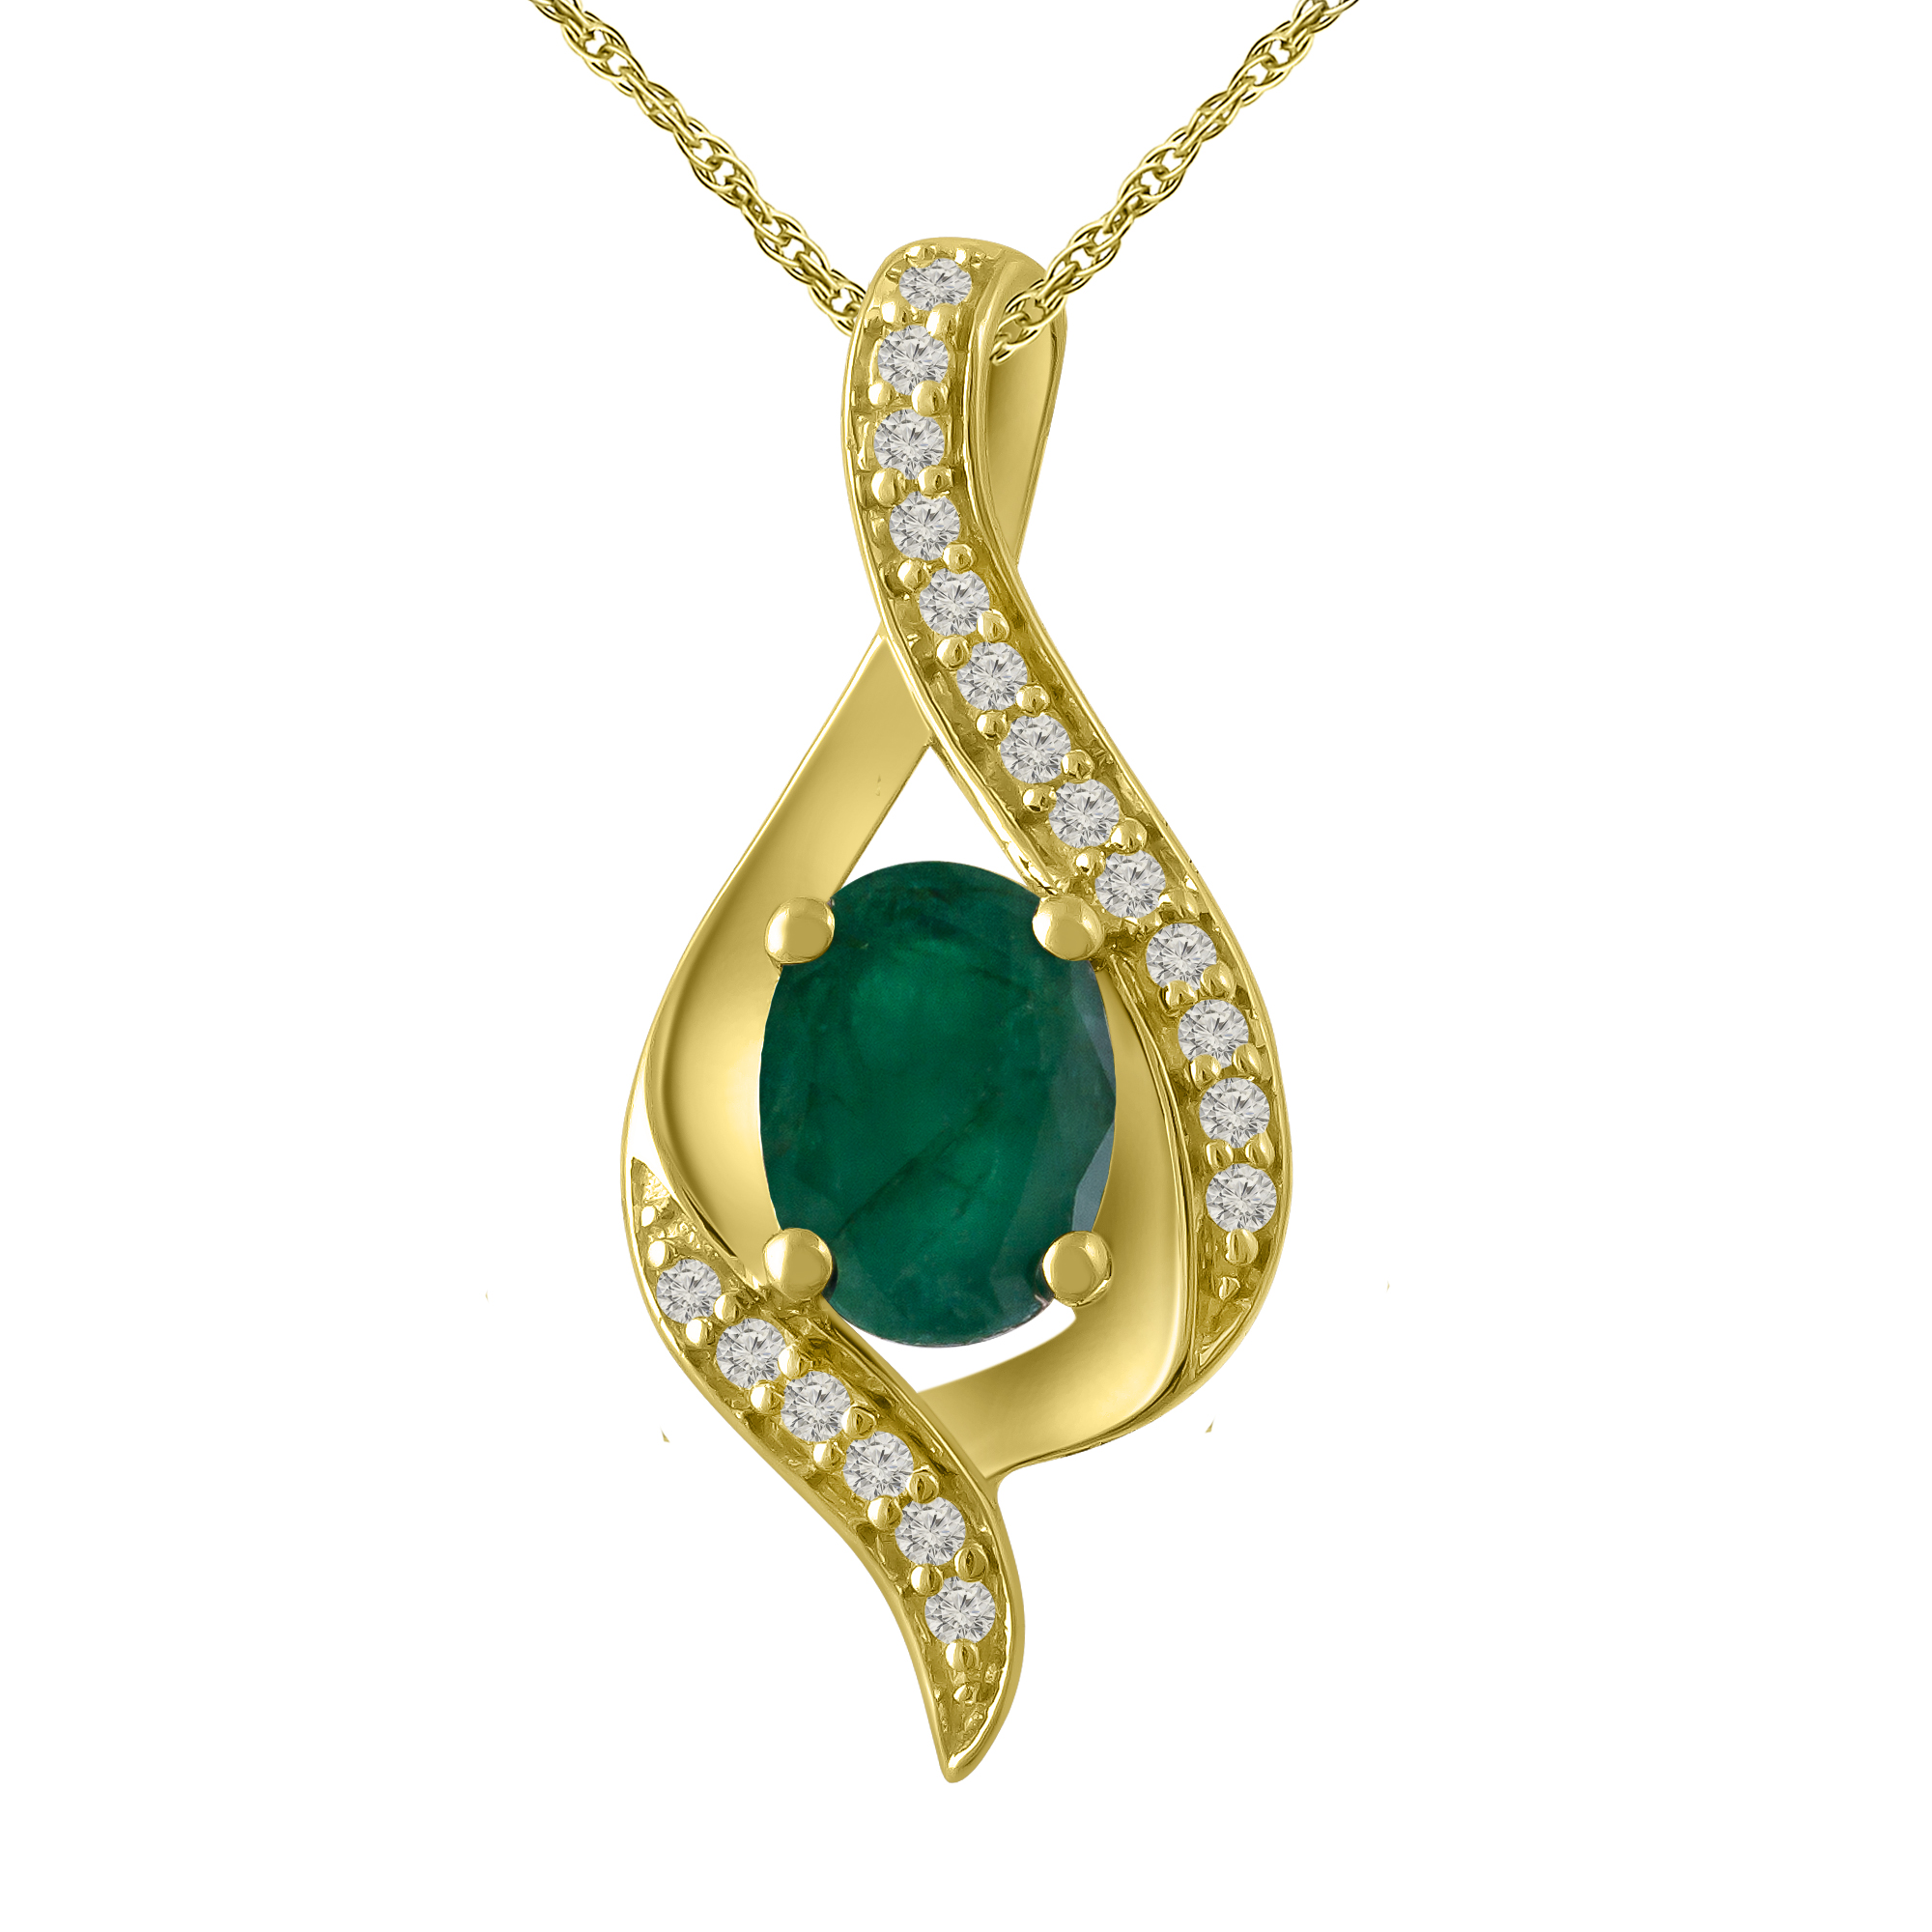 7x5 Genuine Emerald Pendant in Gold over Sterling Silver